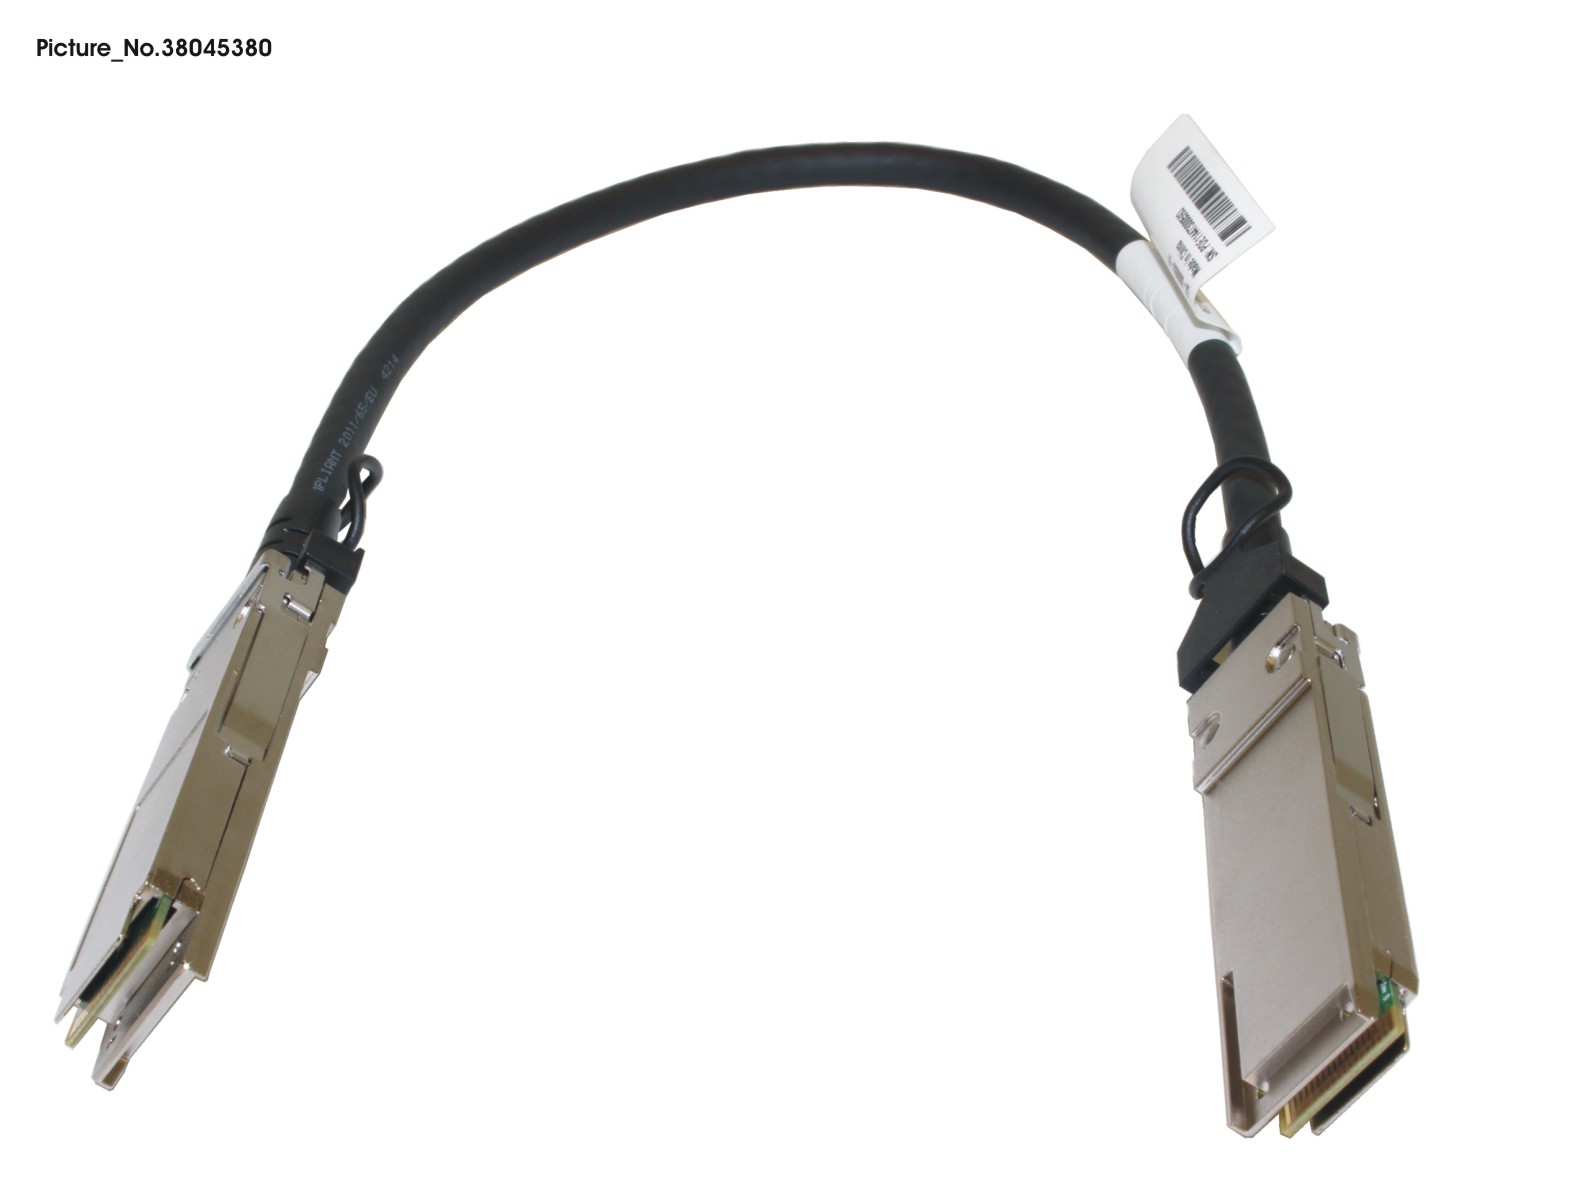 40GBE QSFP CABLE BROCADE, 0.5M(STACKING)